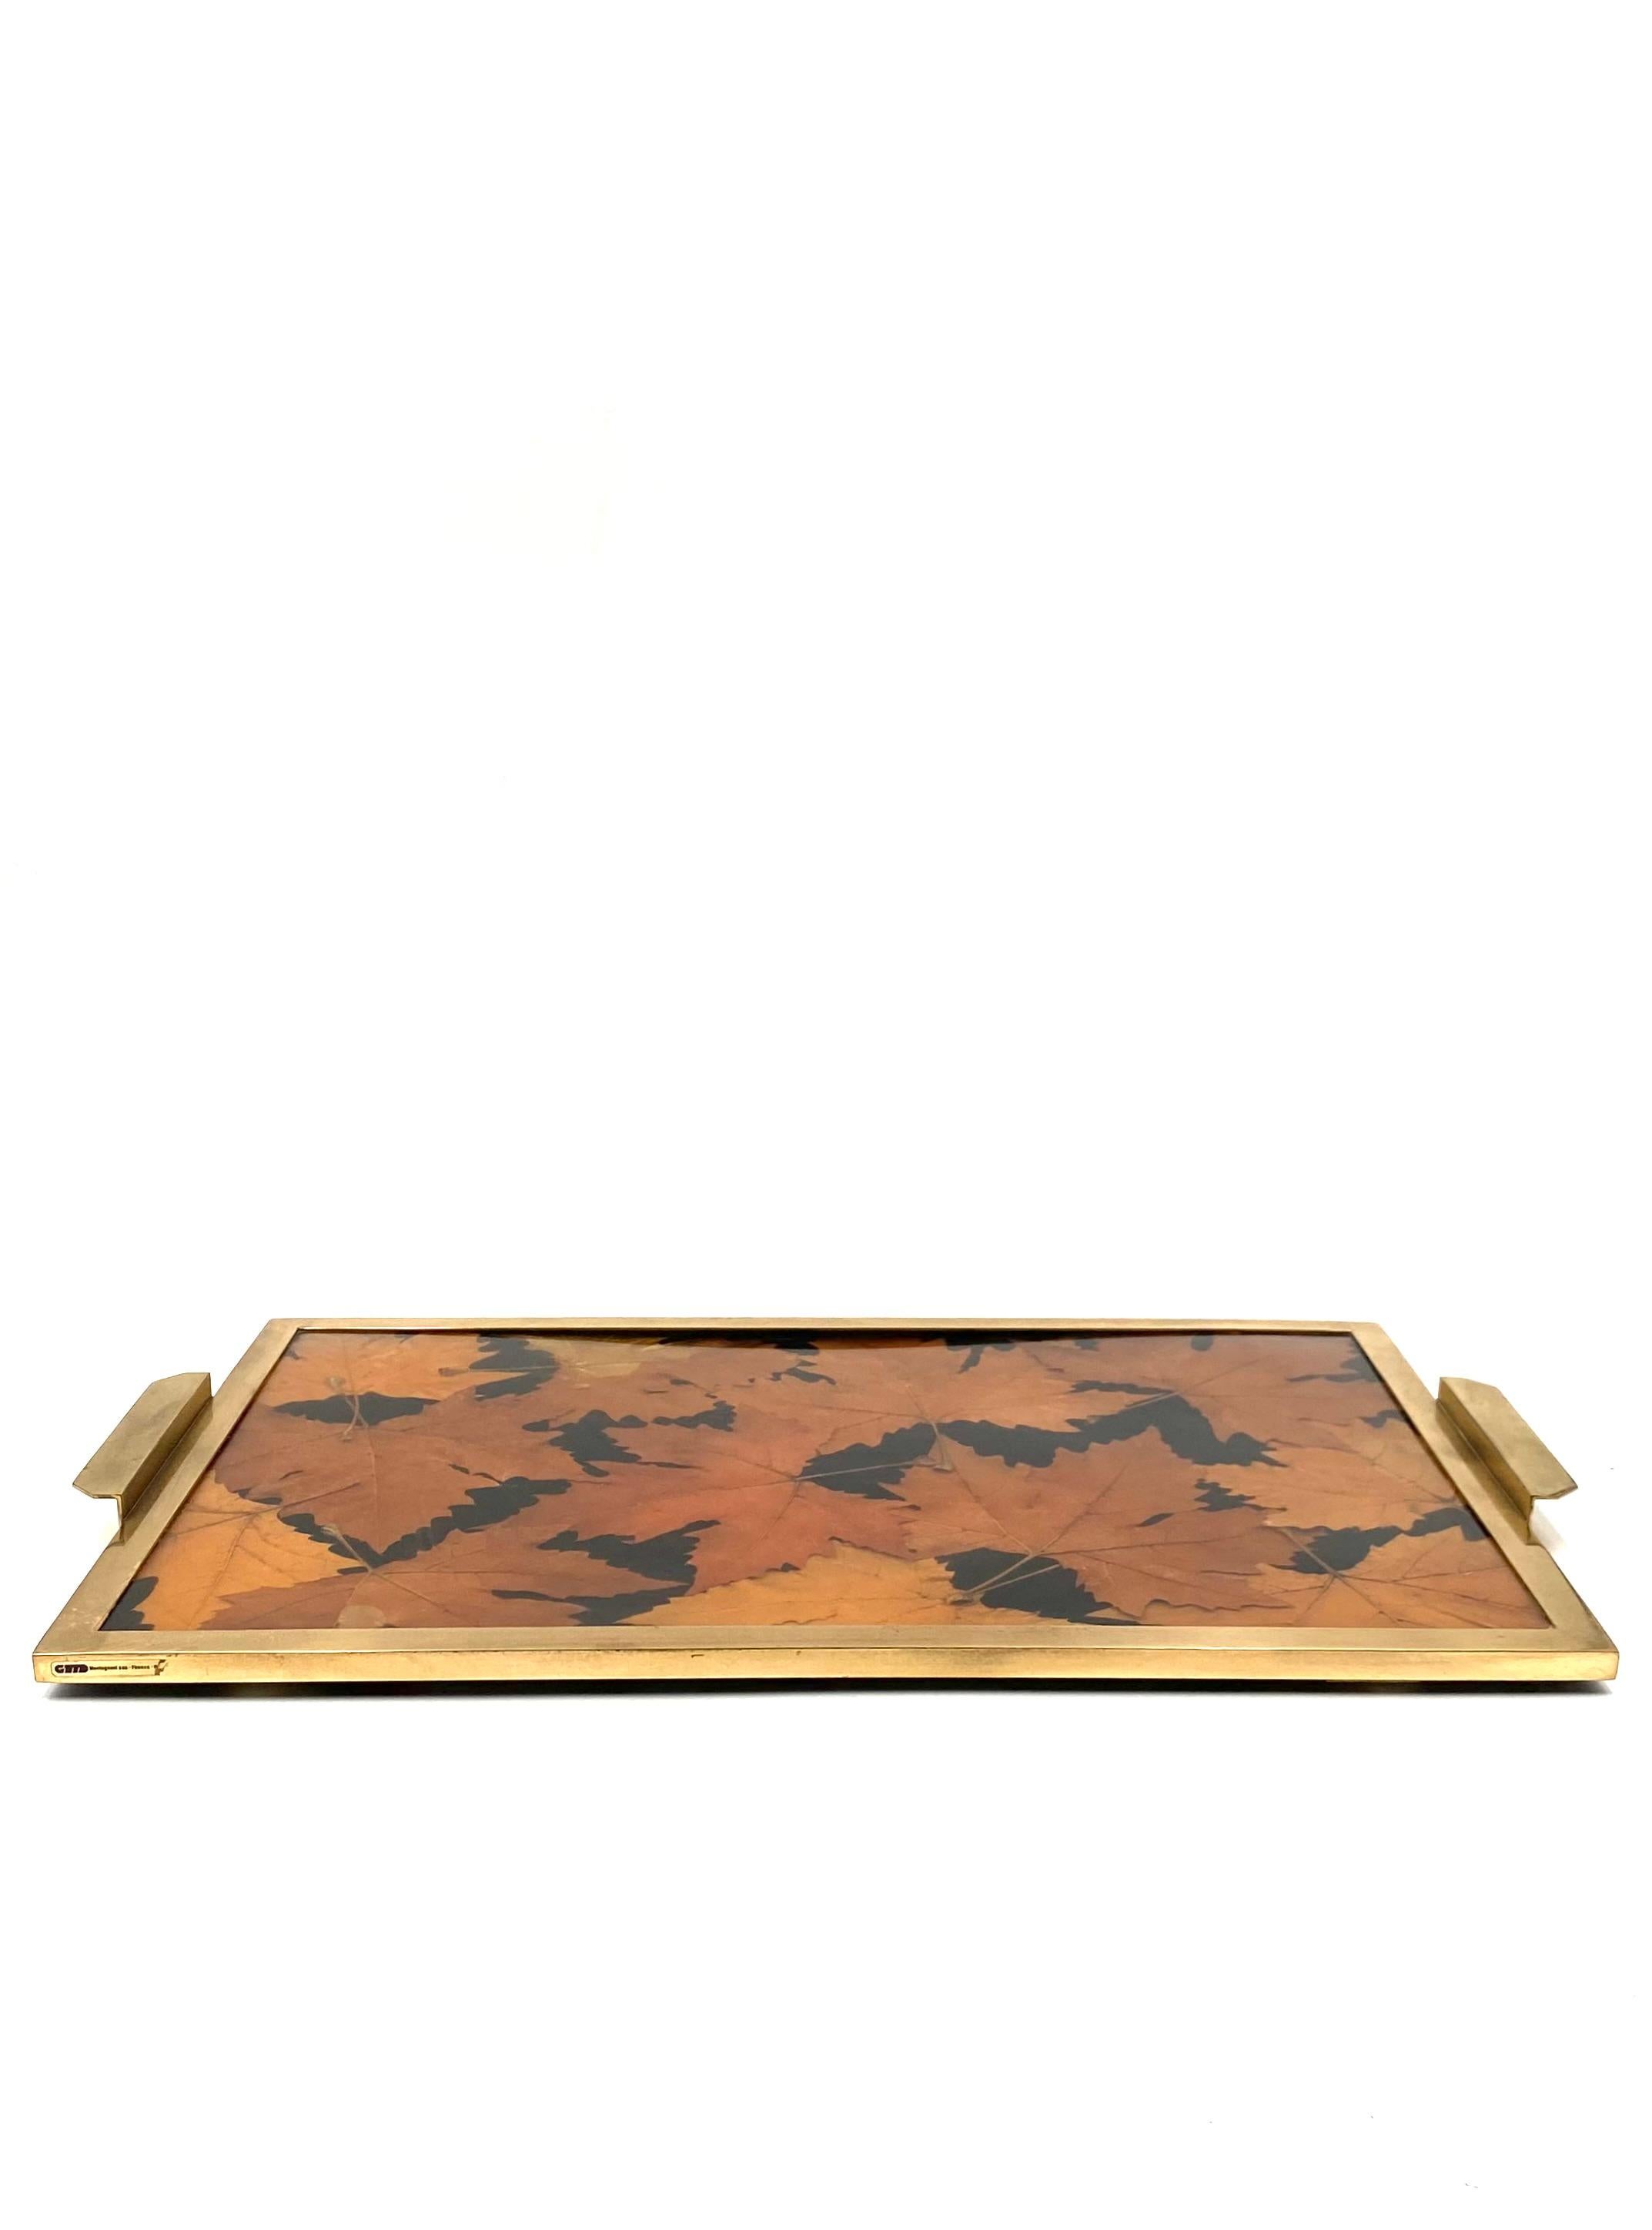 Hollywood regency brass and leaves resin tray, Montagnani Firenze Italy 1970s For Sale 3